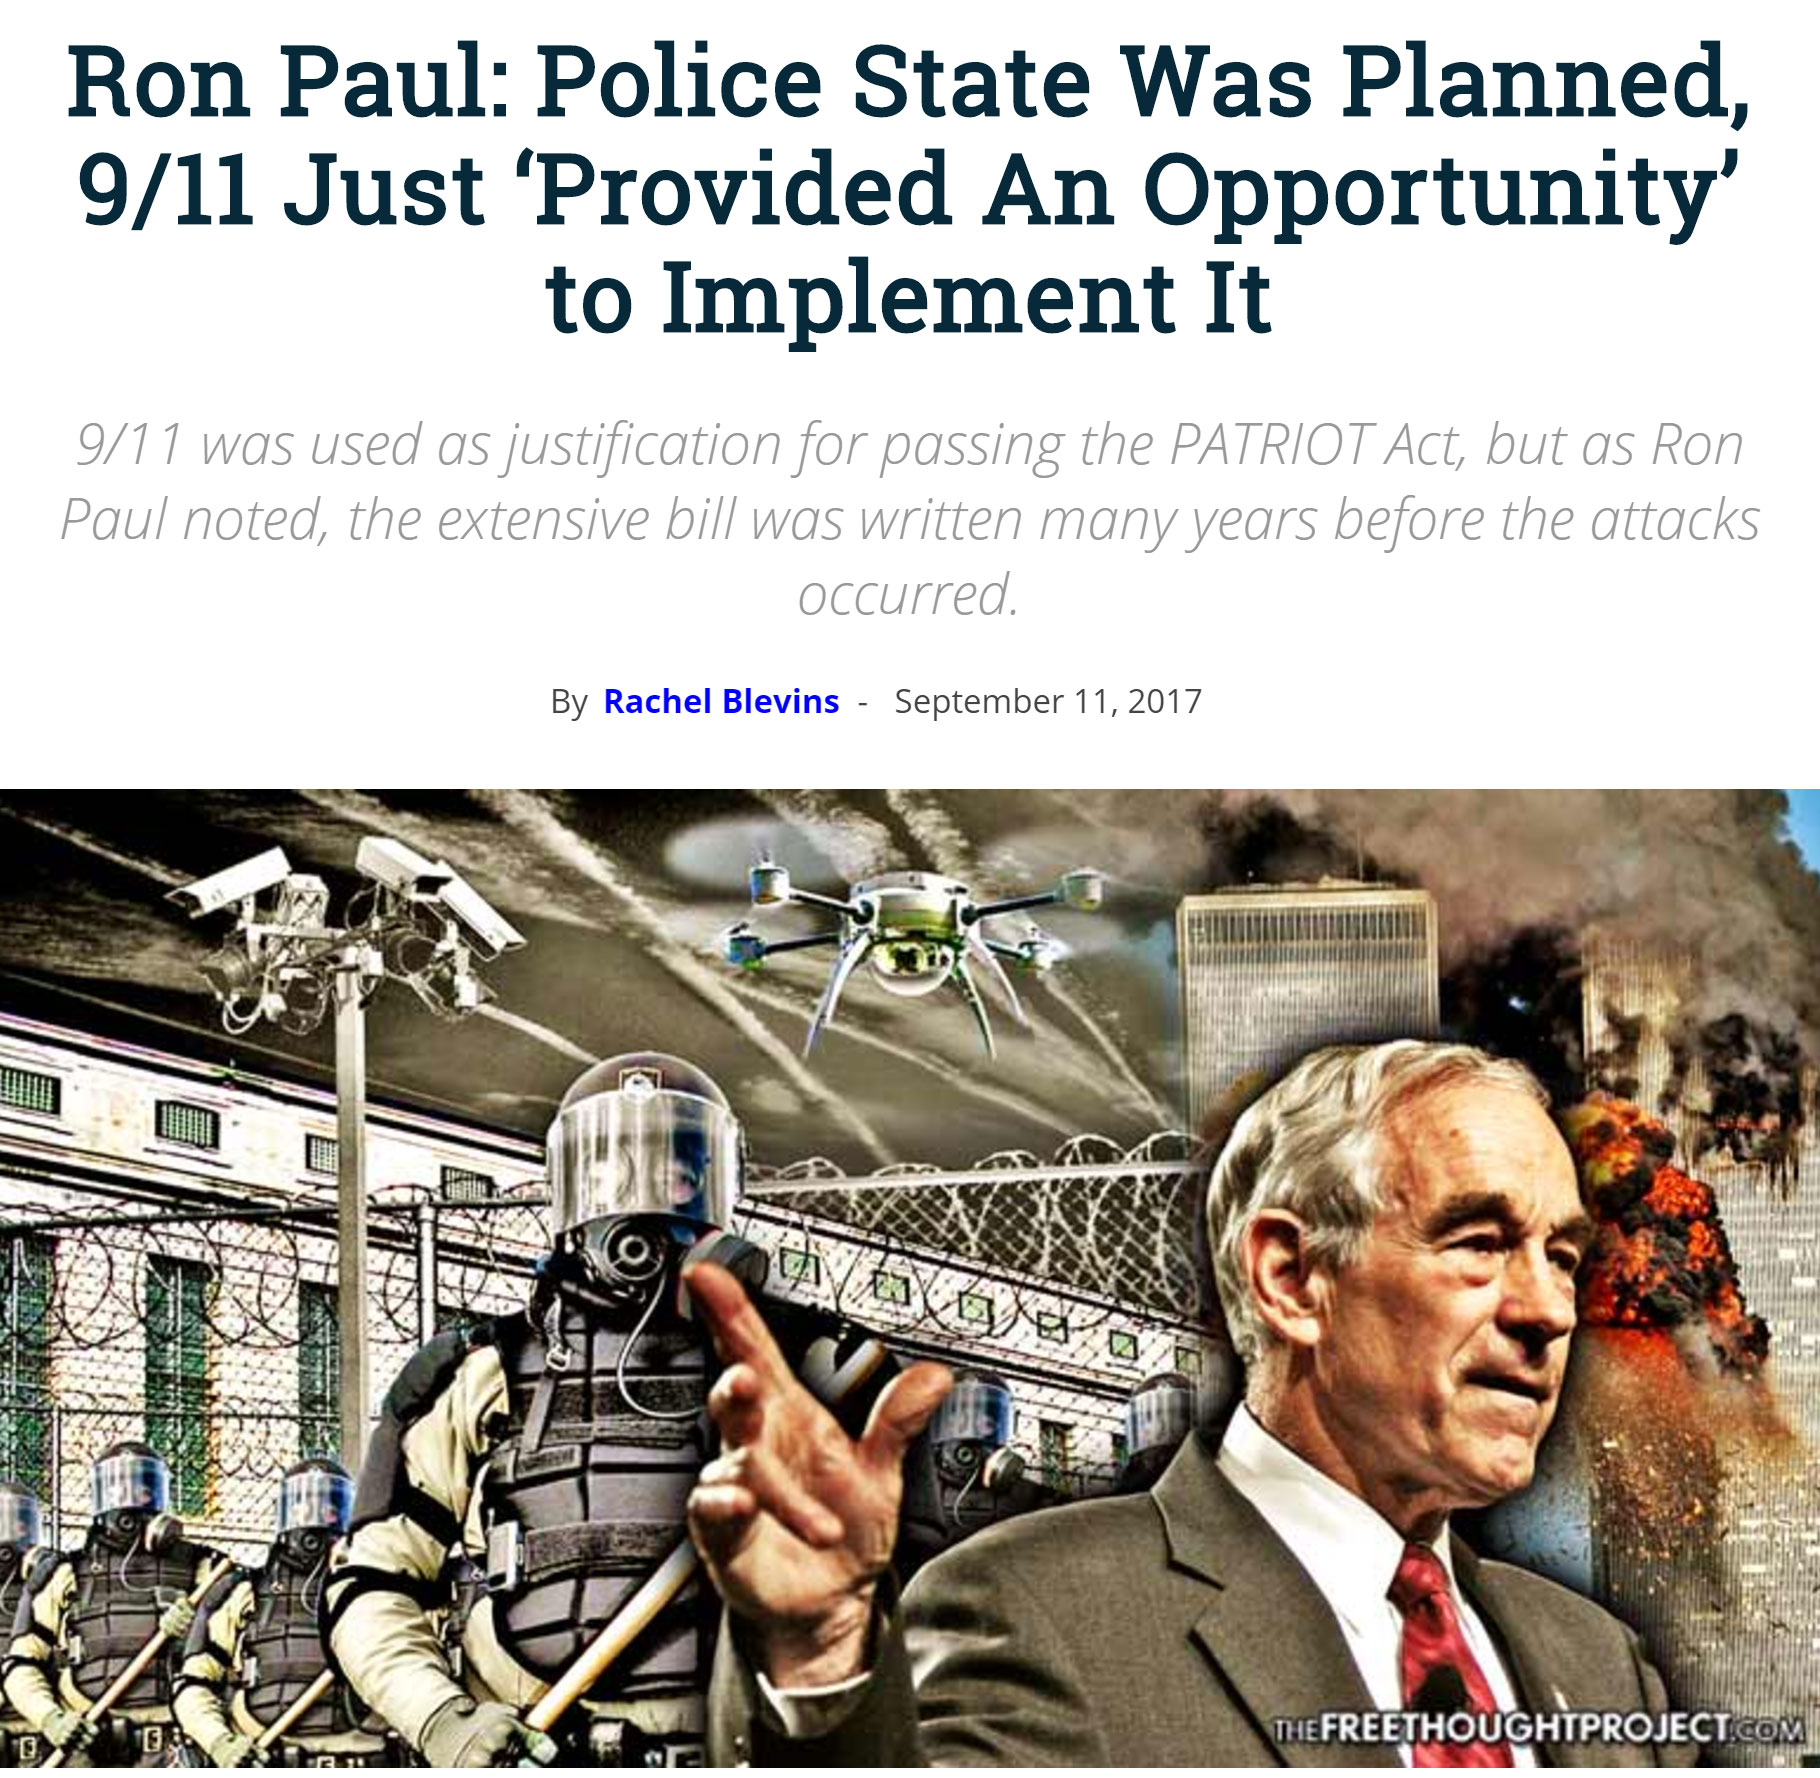 14-Police-State-Was-Planned.jpg